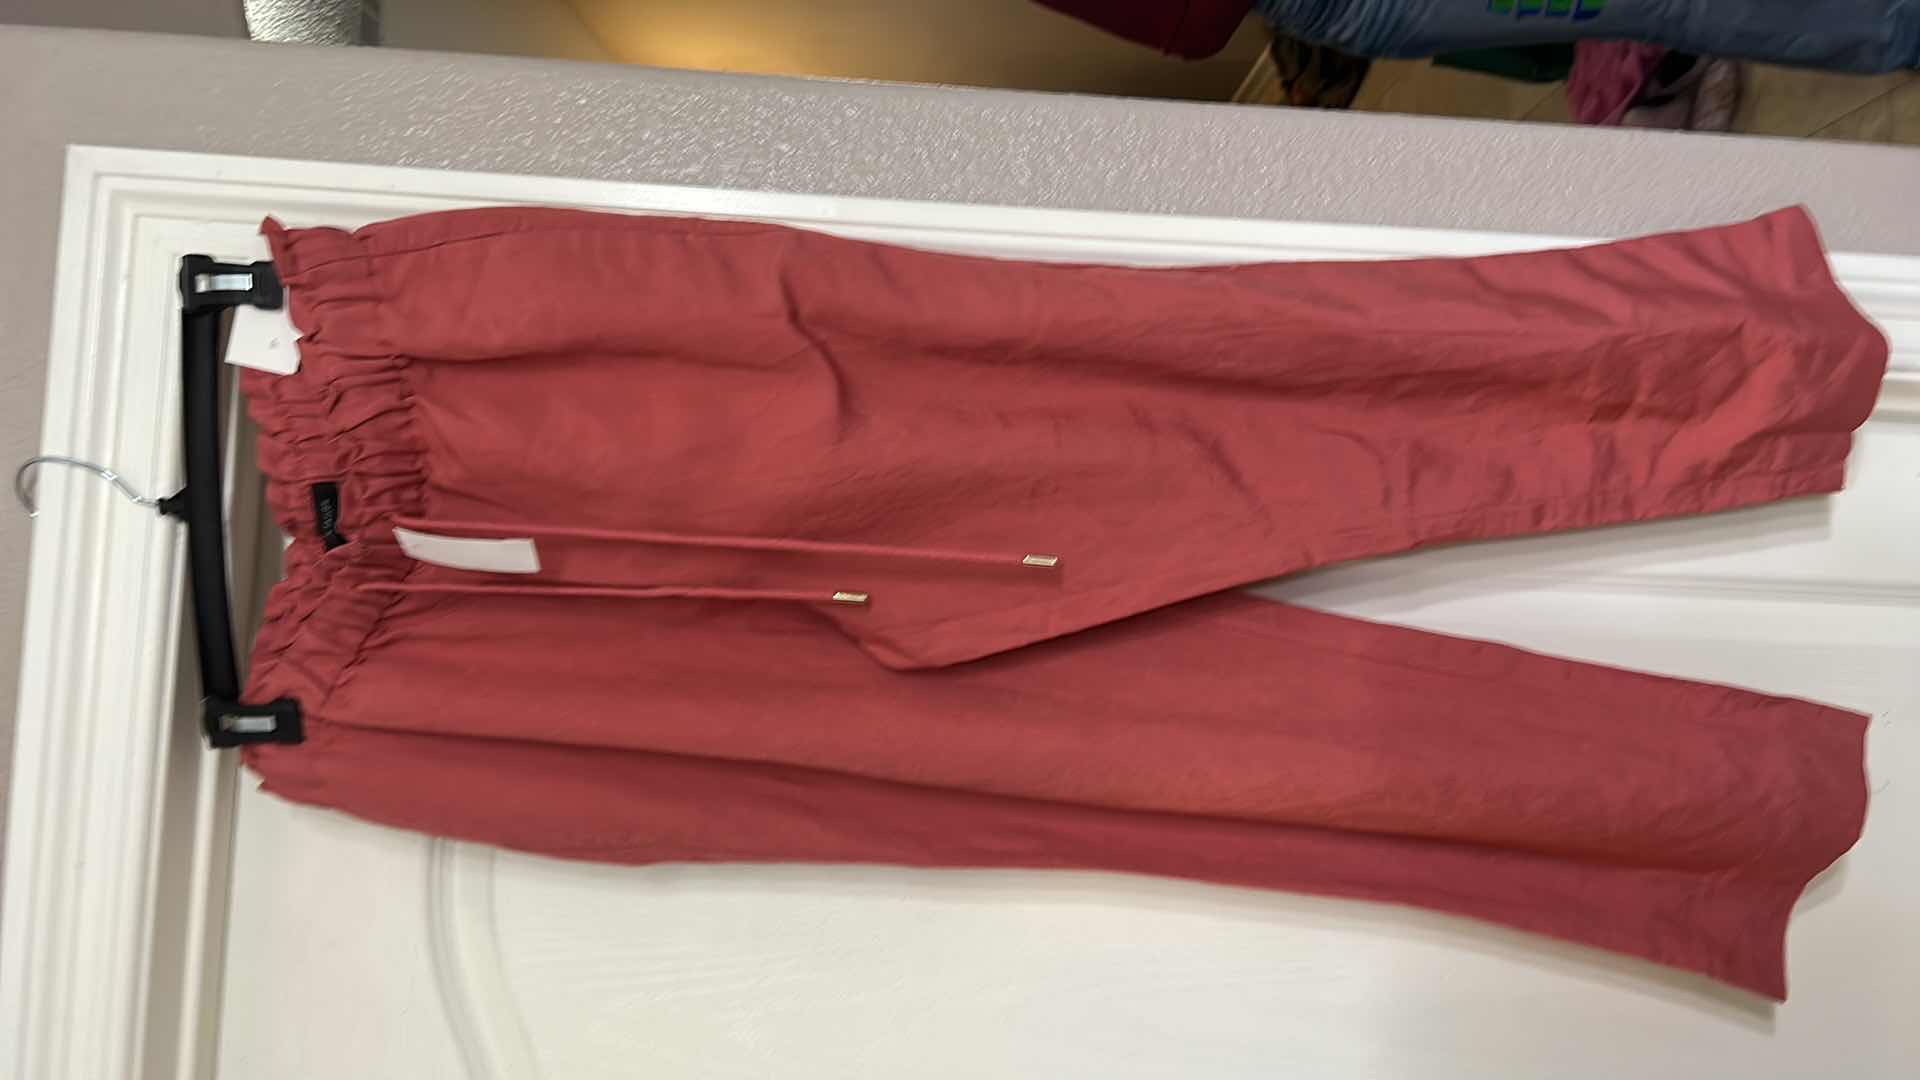 Photo 4 of 2 NWT WOMENSWEAR- COLDWATER CREEK SKIRT IN RUSSET SISE SM $100, ANN TAYLOR PANTS SIZE MED $70